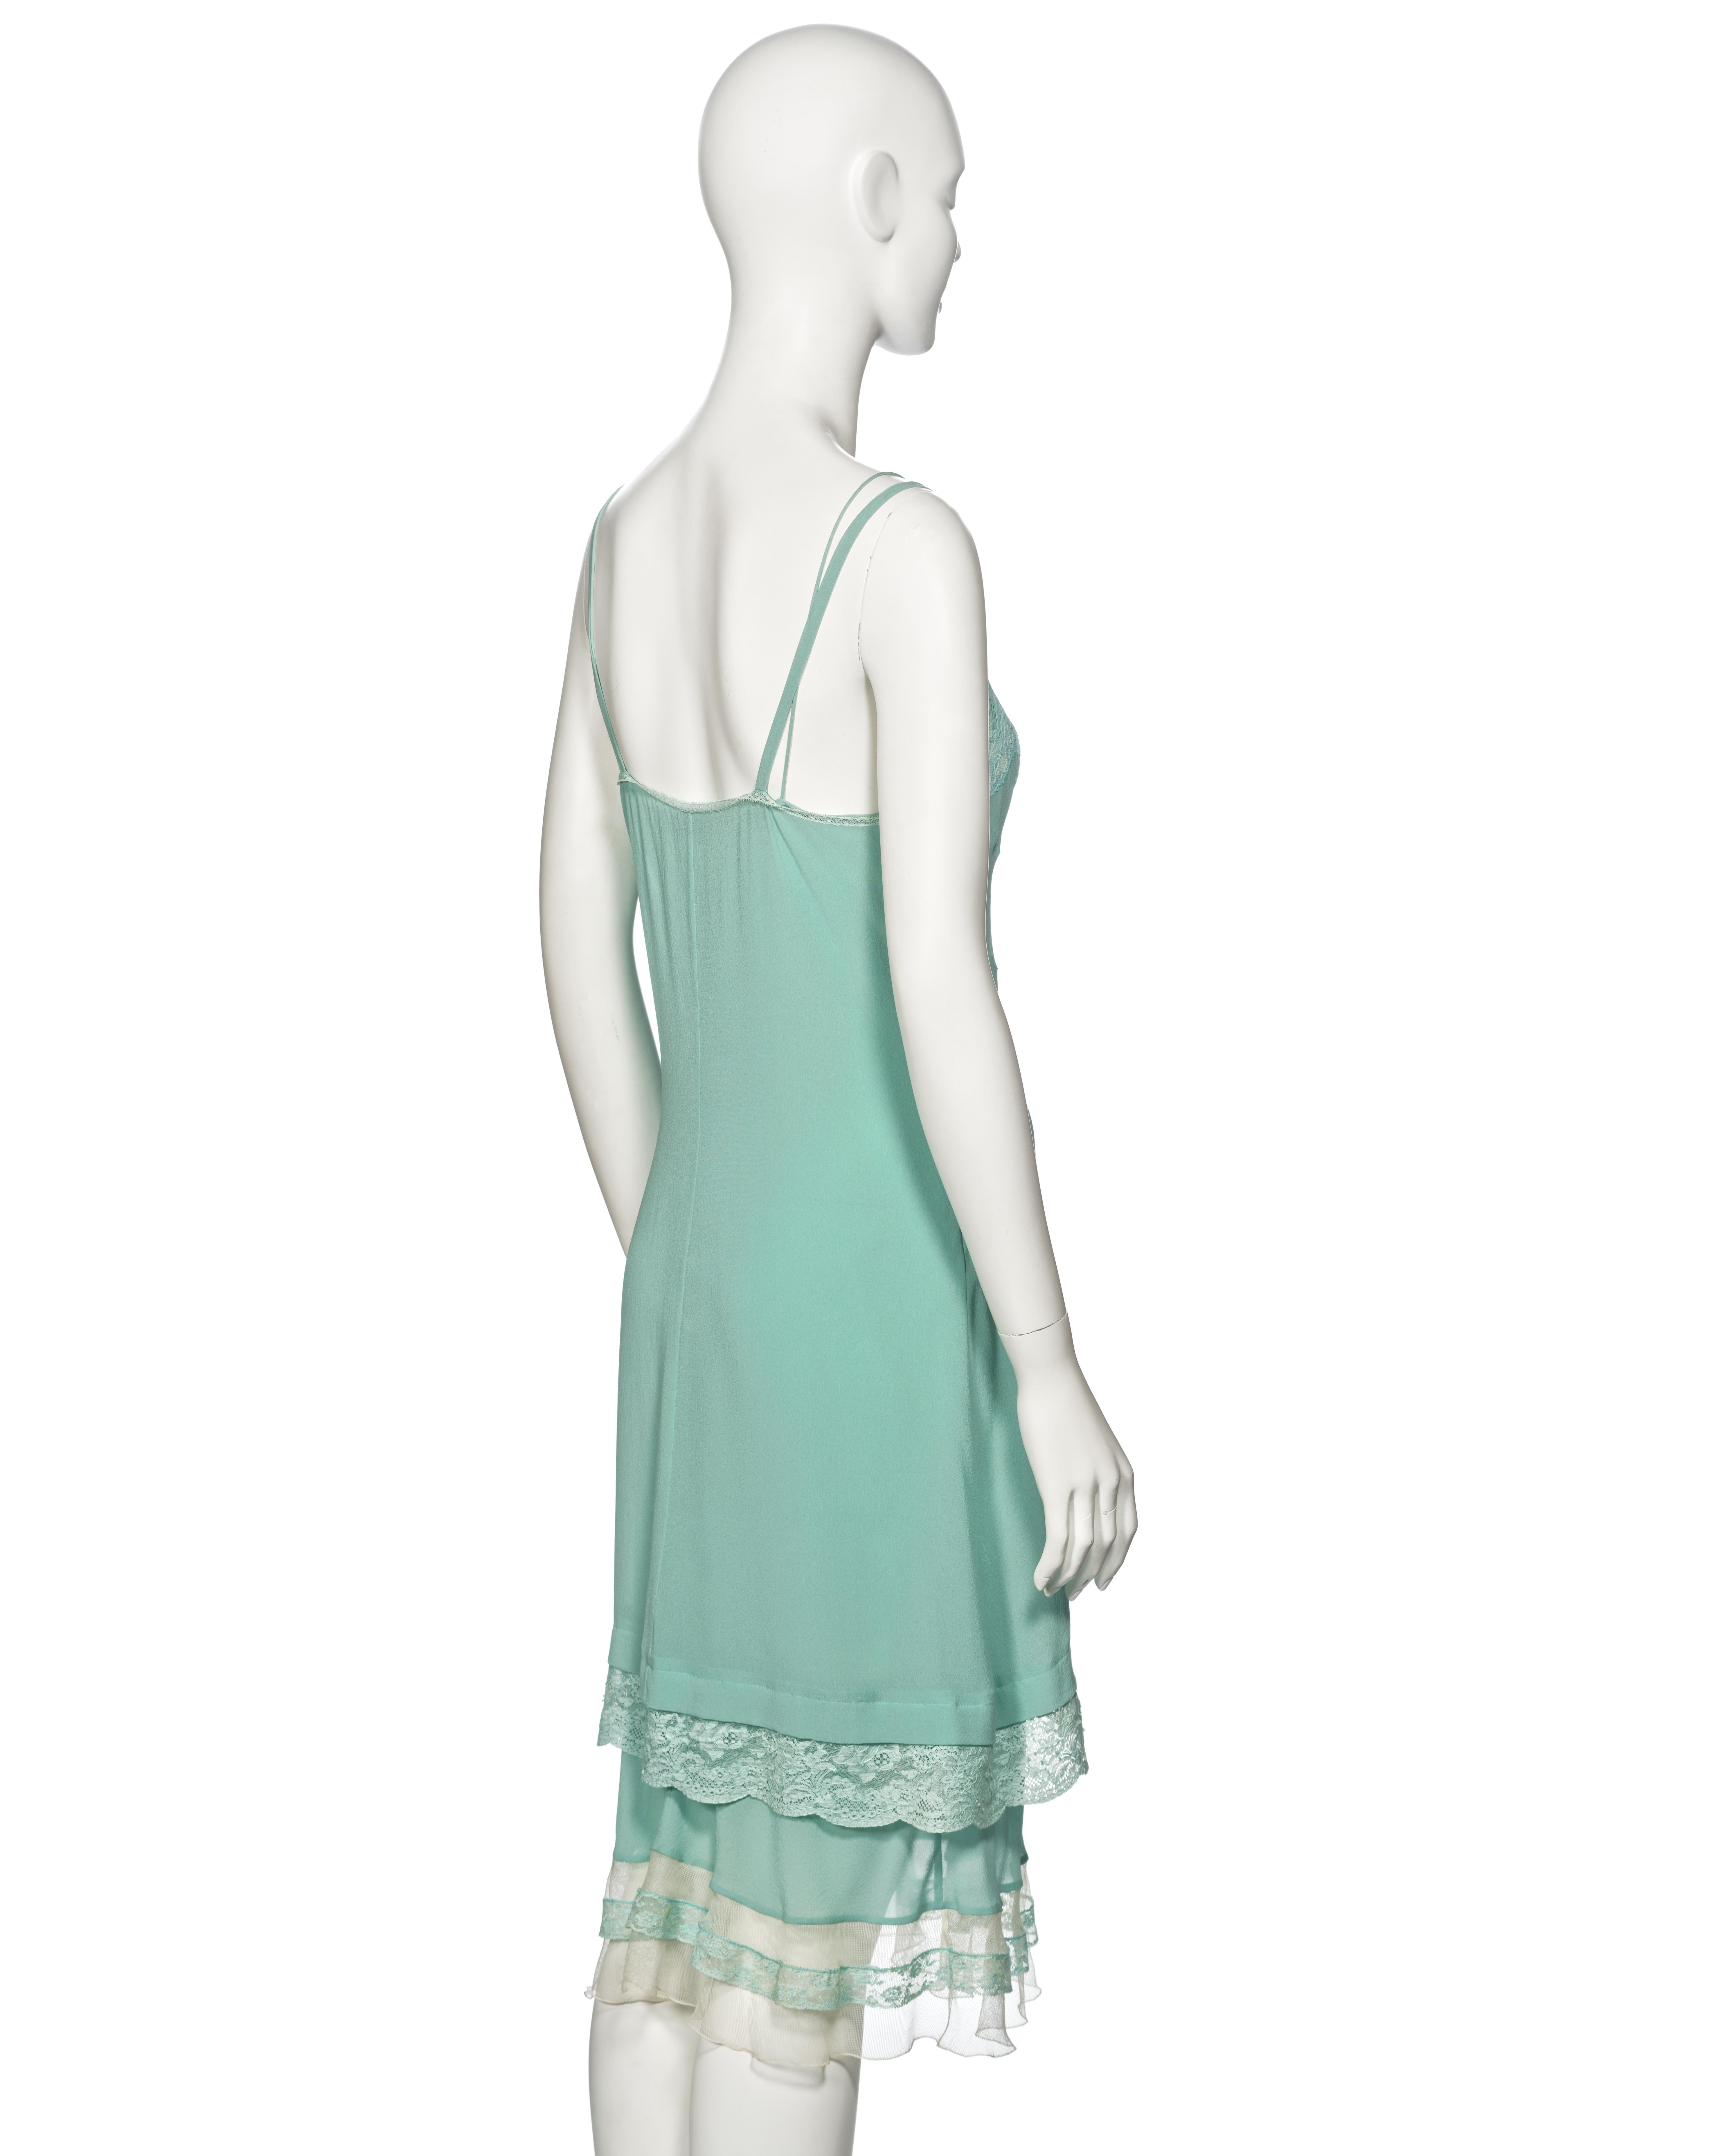 Christian Dior by John Galliano Turquoise Silk Double Layered Dress, ss 2005 3